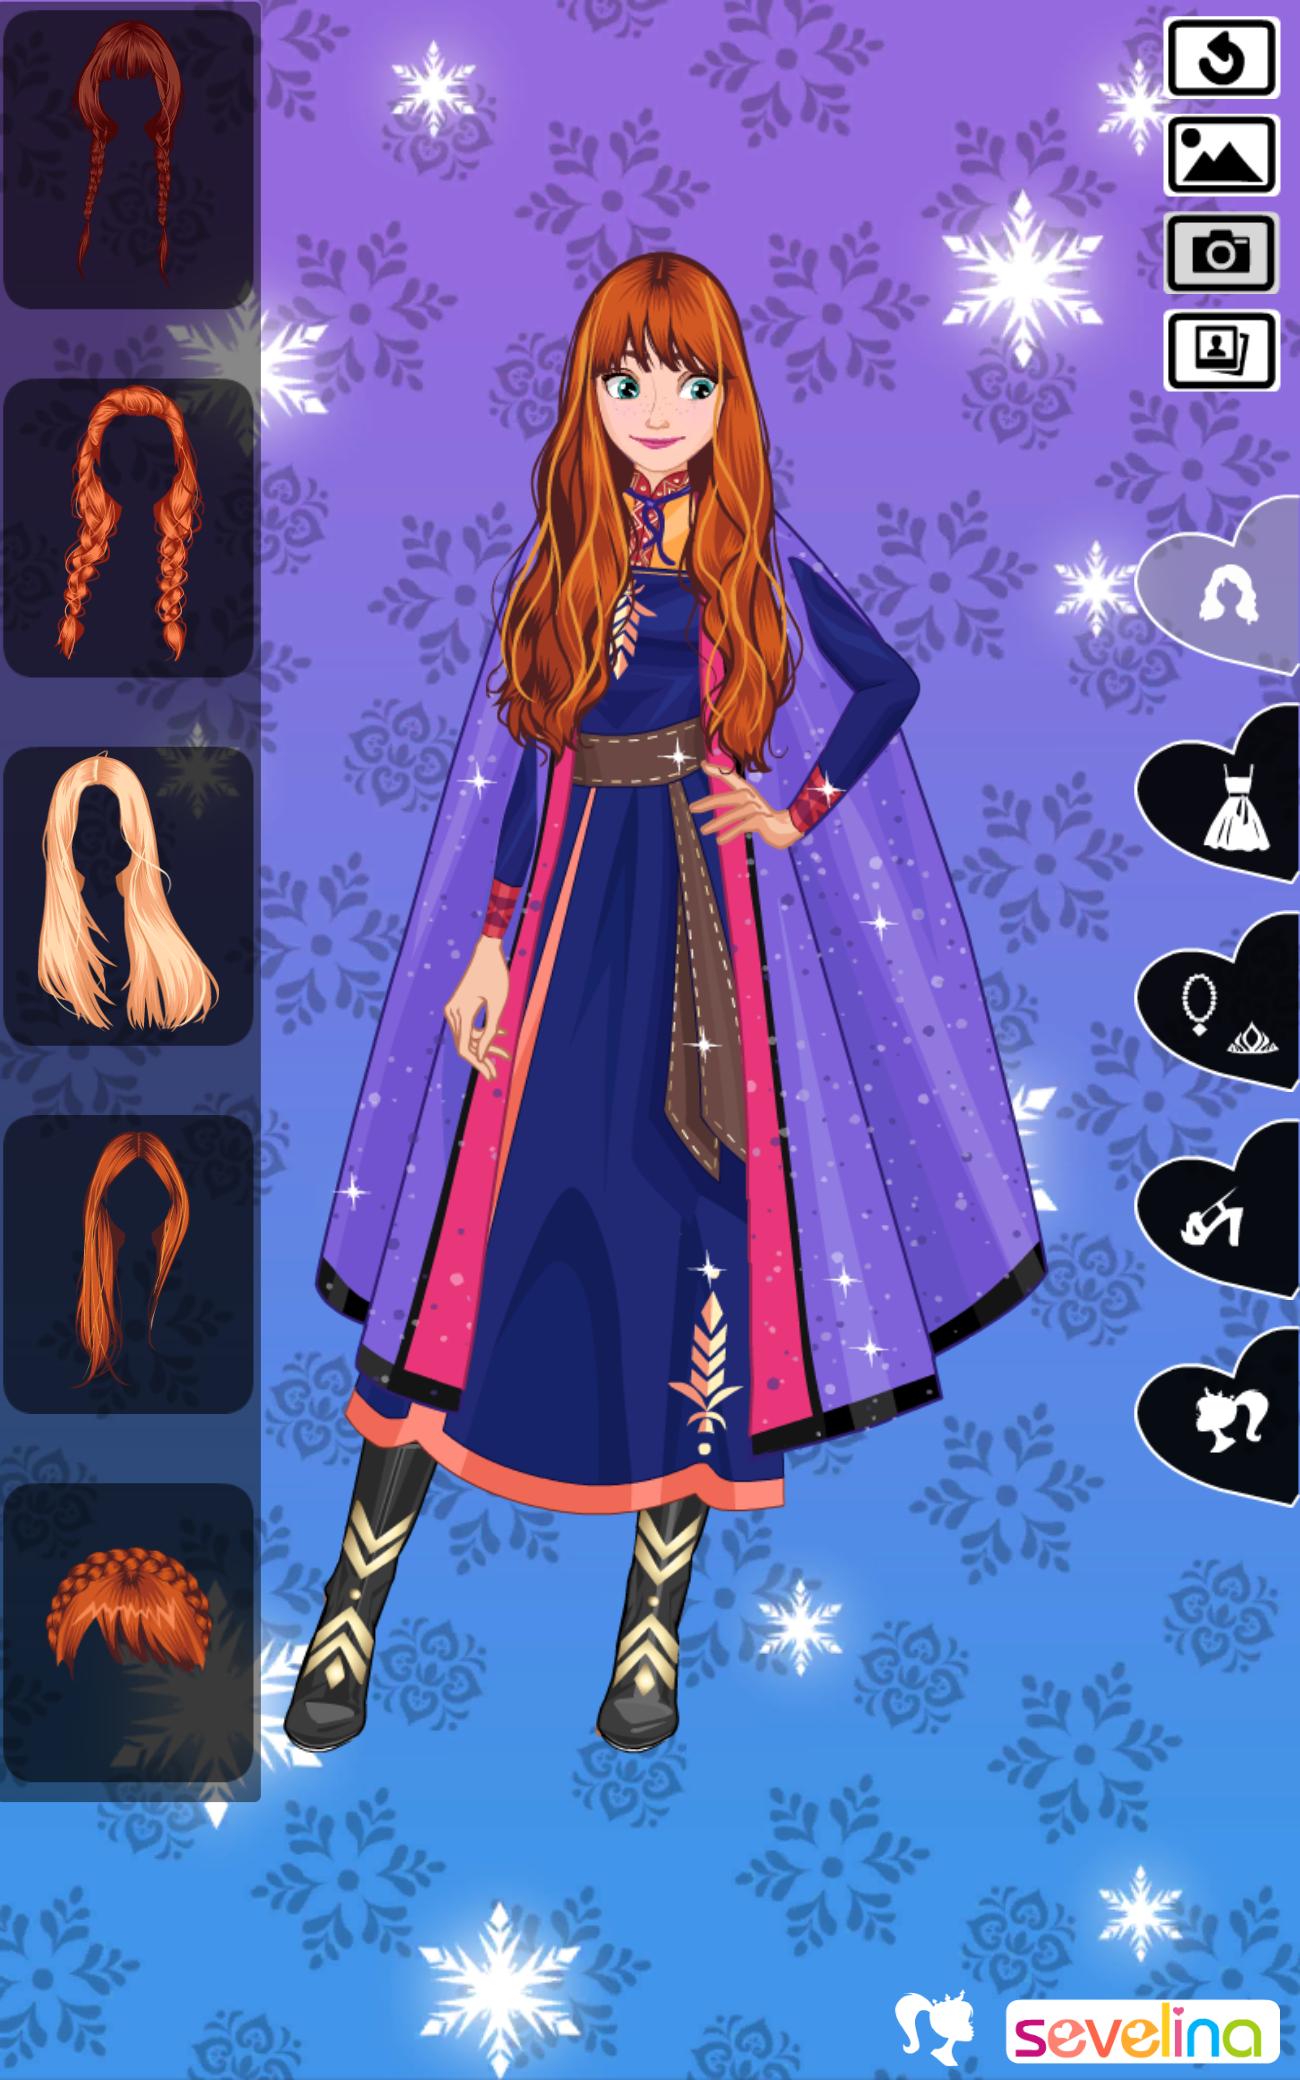 ❄️ Icy or Fire 🔥 dress up game ❄️ Frozen land 2.4 Screenshot 4